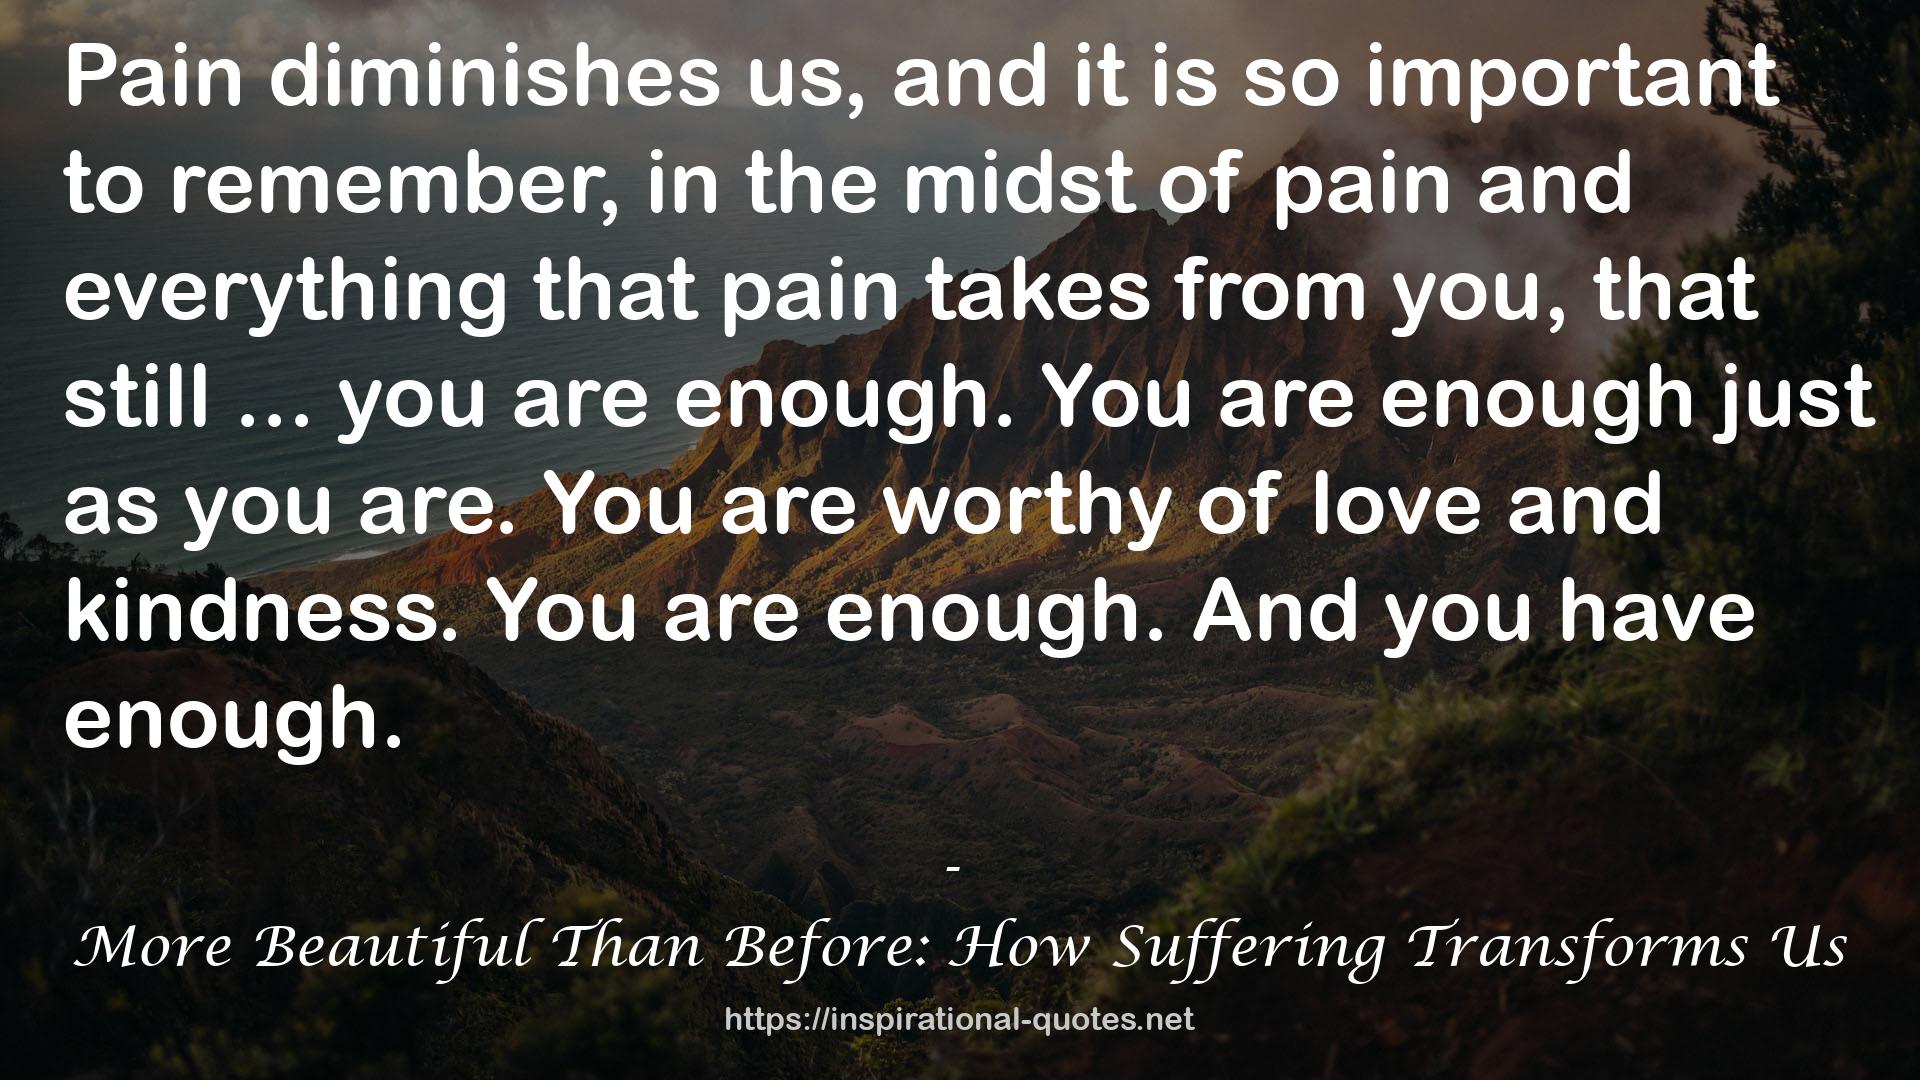 More Beautiful Than Before: How Suffering Transforms Us QUOTES